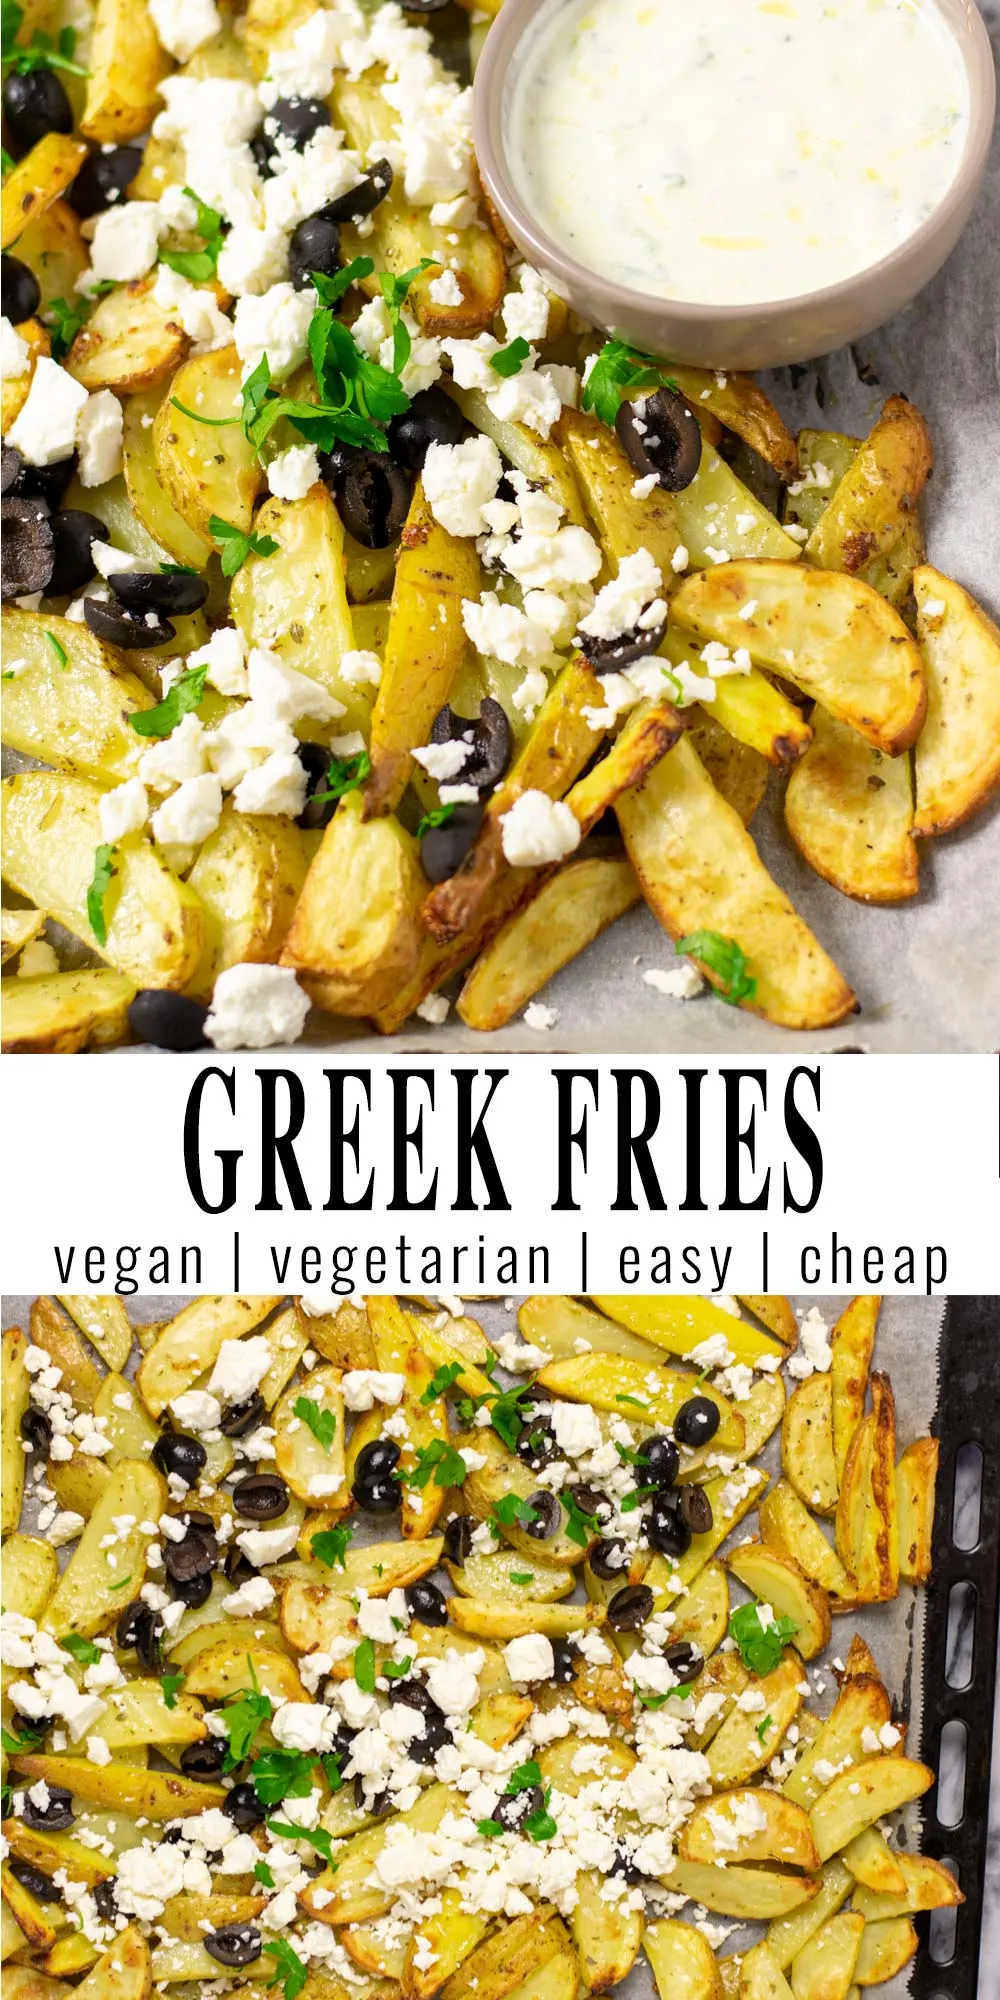 Collage of two pictures of the Green Fries with recipe title text.